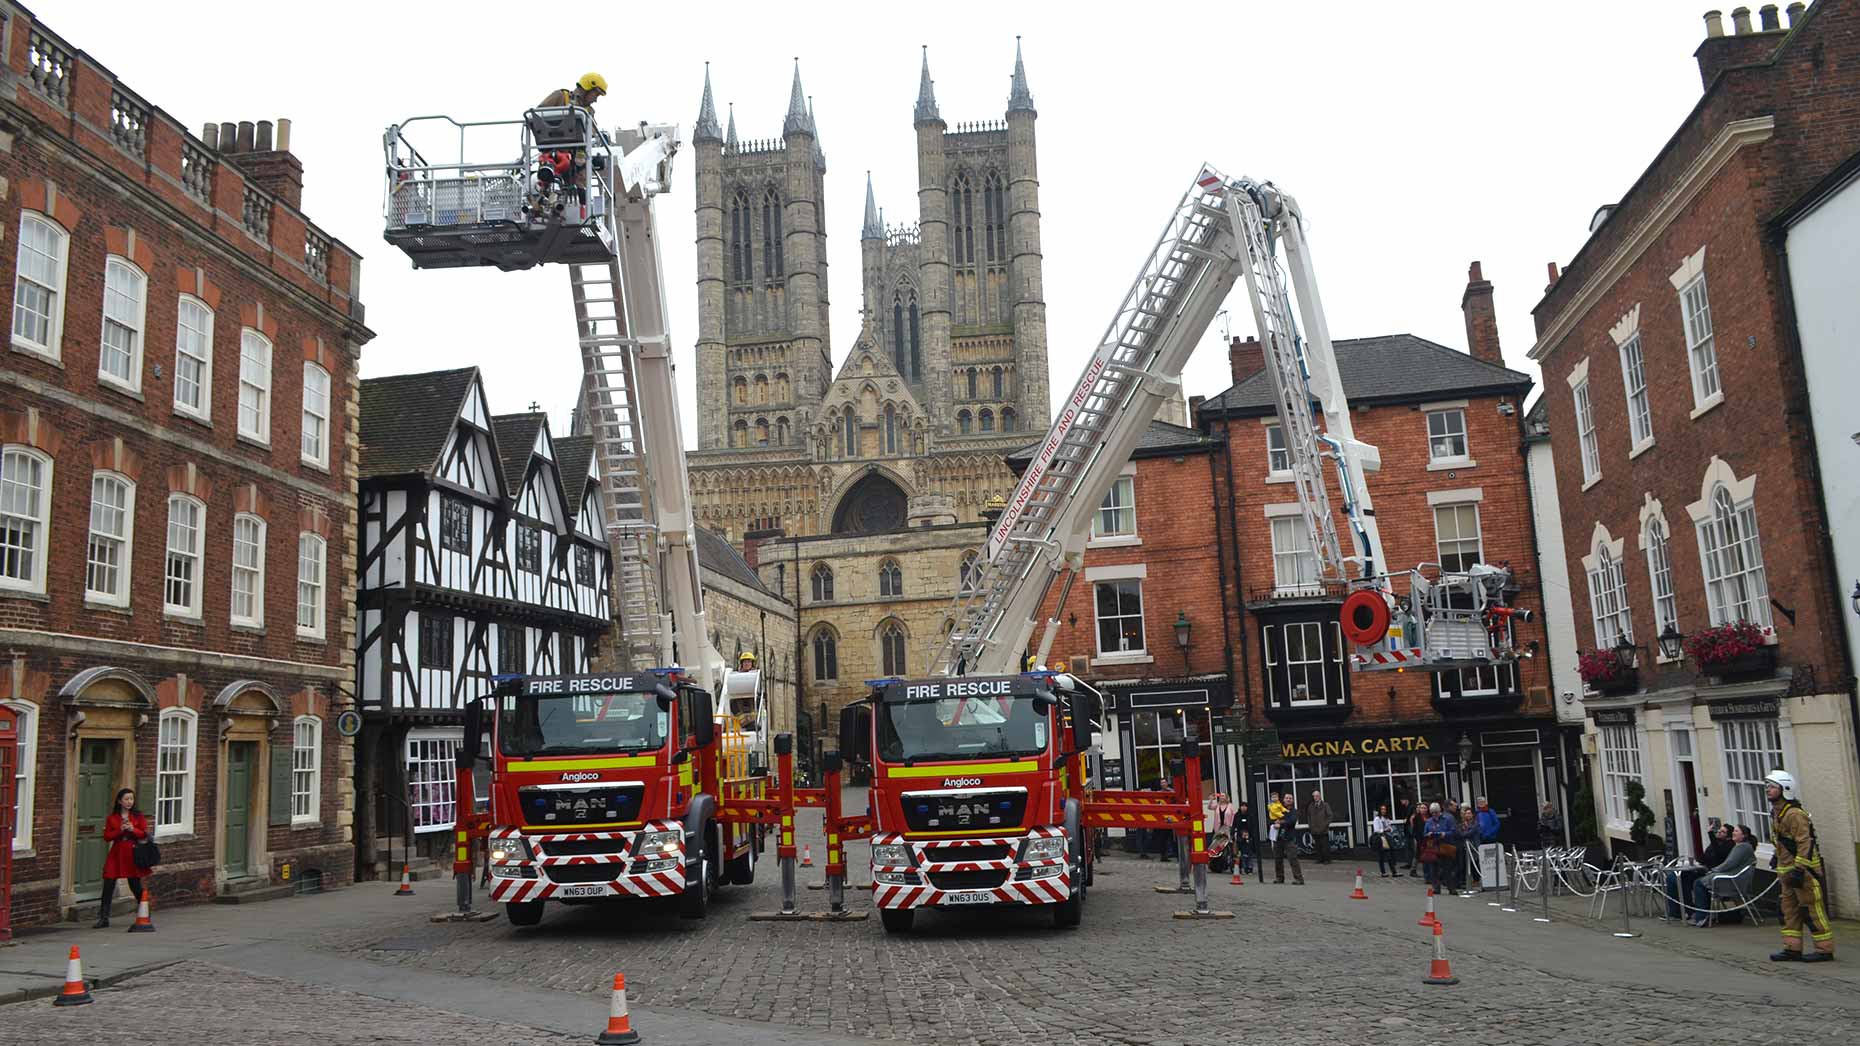 The new aerial platforms for Lincolnshire Fire and Rescue.